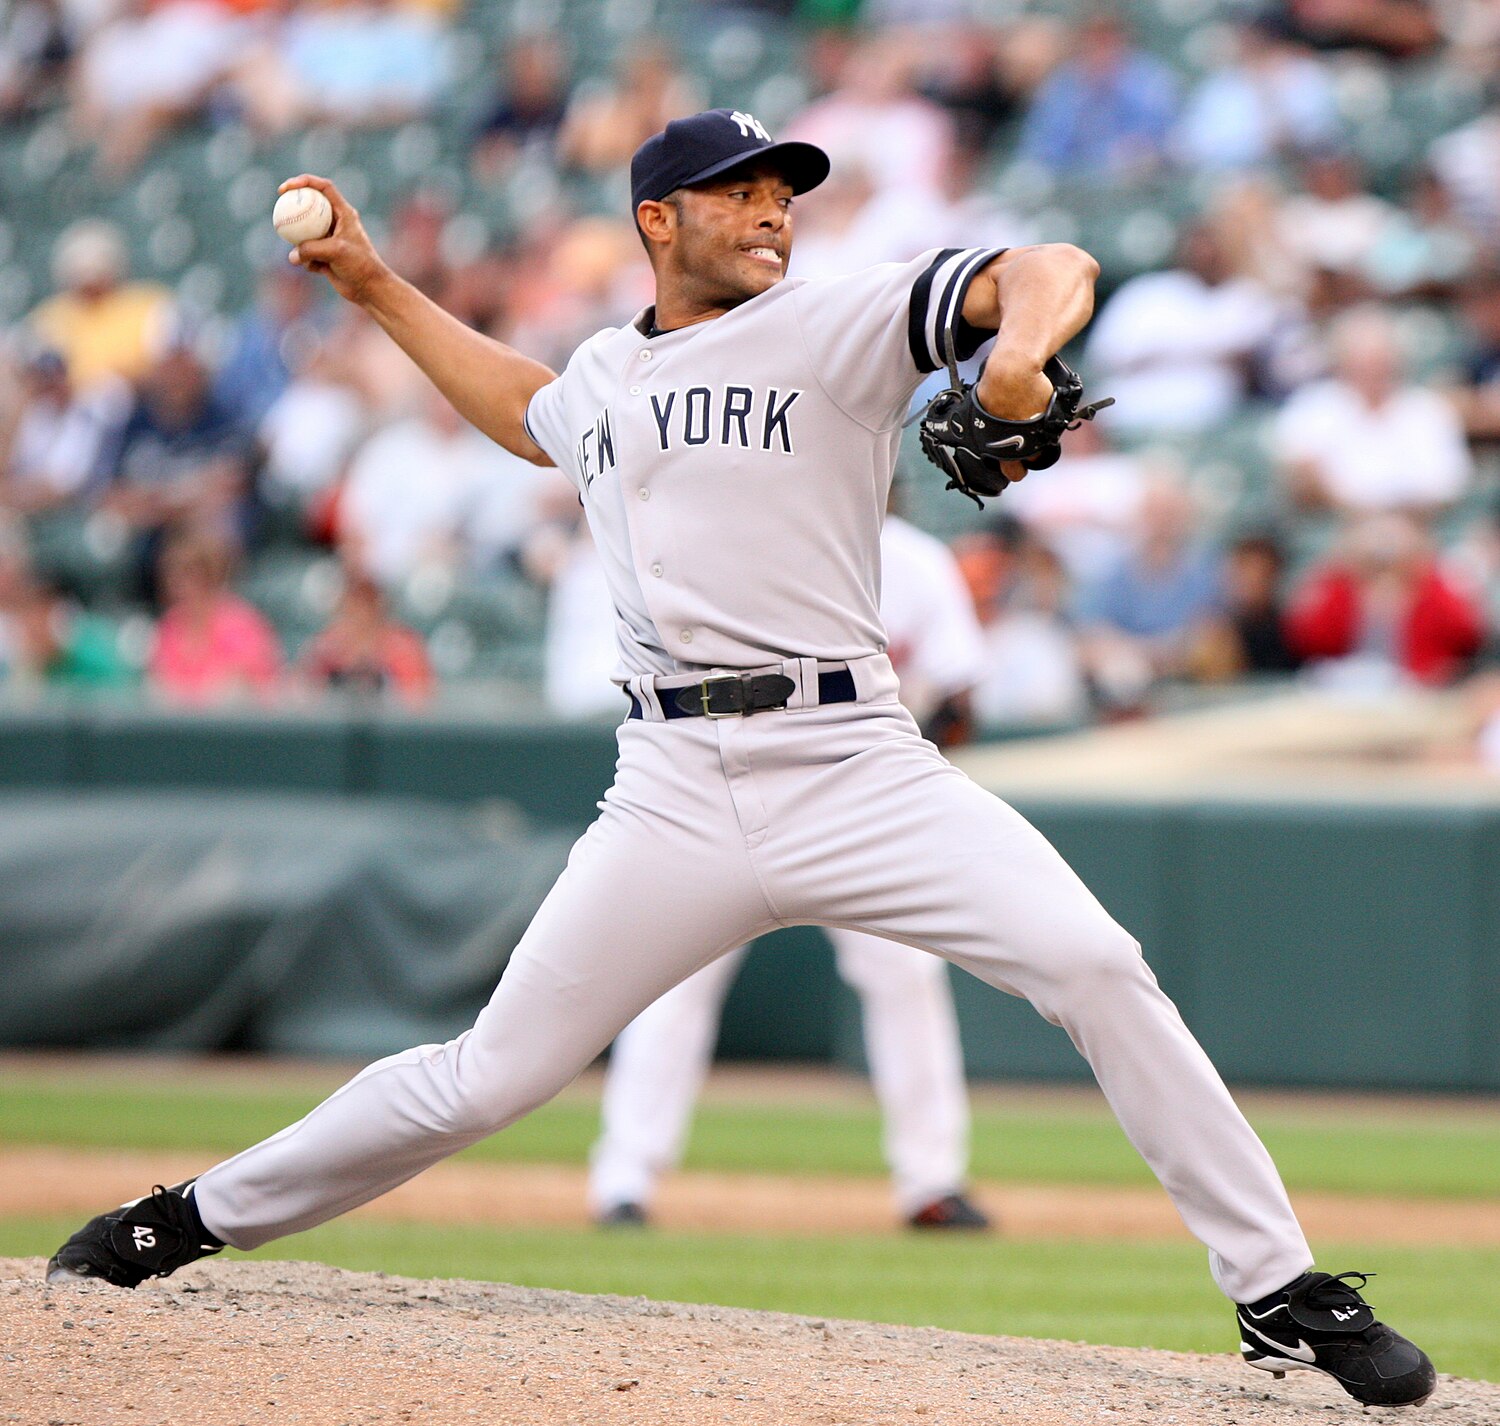 Mariano Rivera to join Family and Children's Aid for annual golf fundraiser